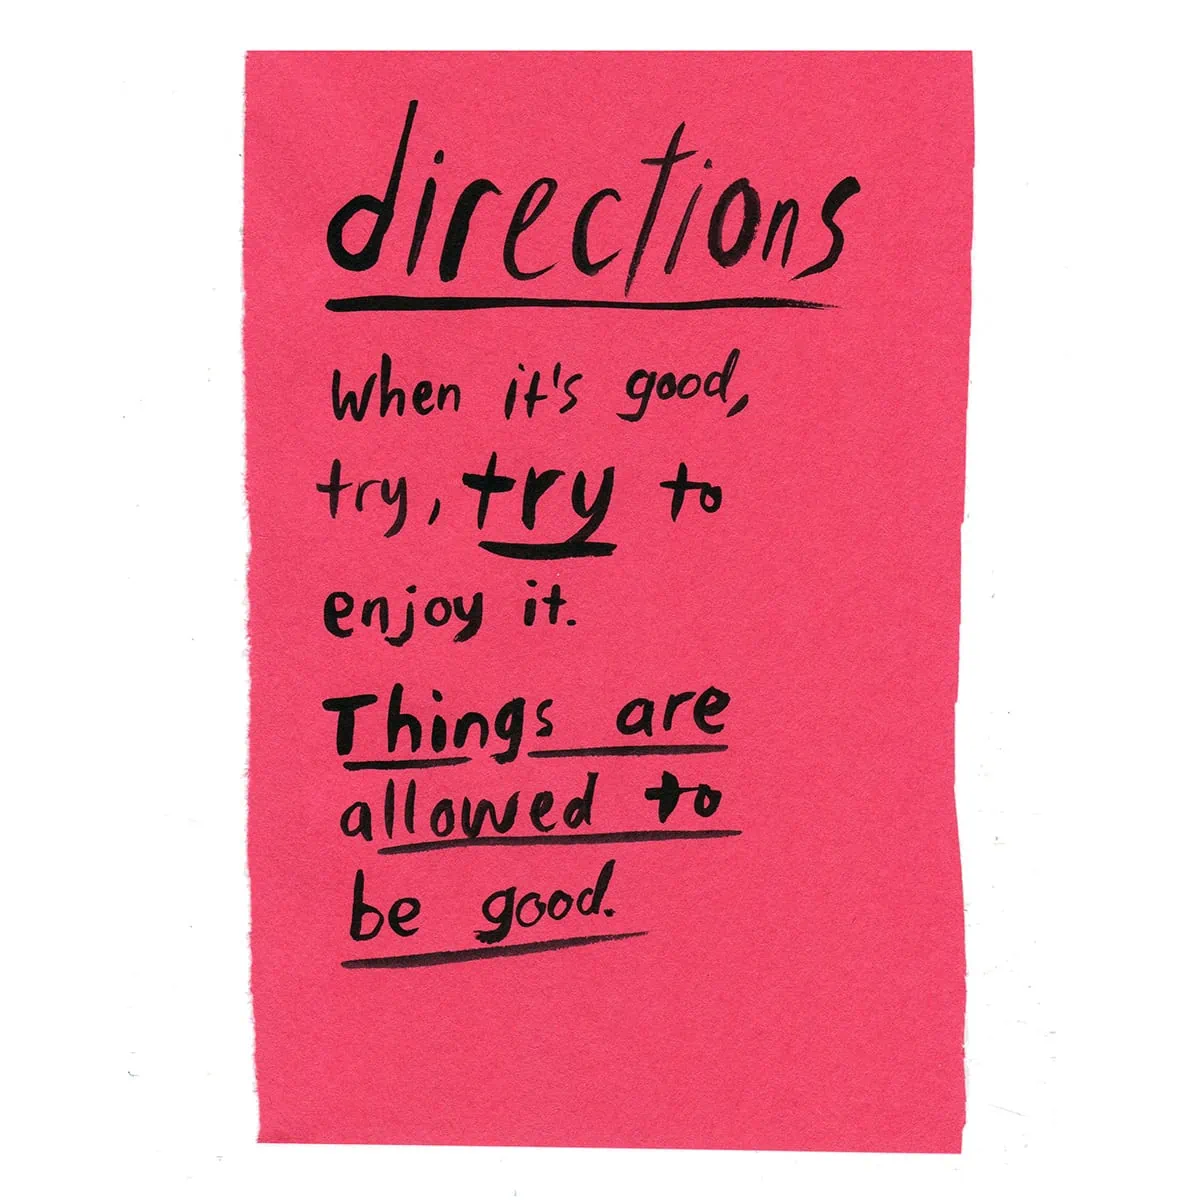 a pink piece of paper with the following written in ink: directions when it's good, try, try to enjoy it. Things are allowed to be good.